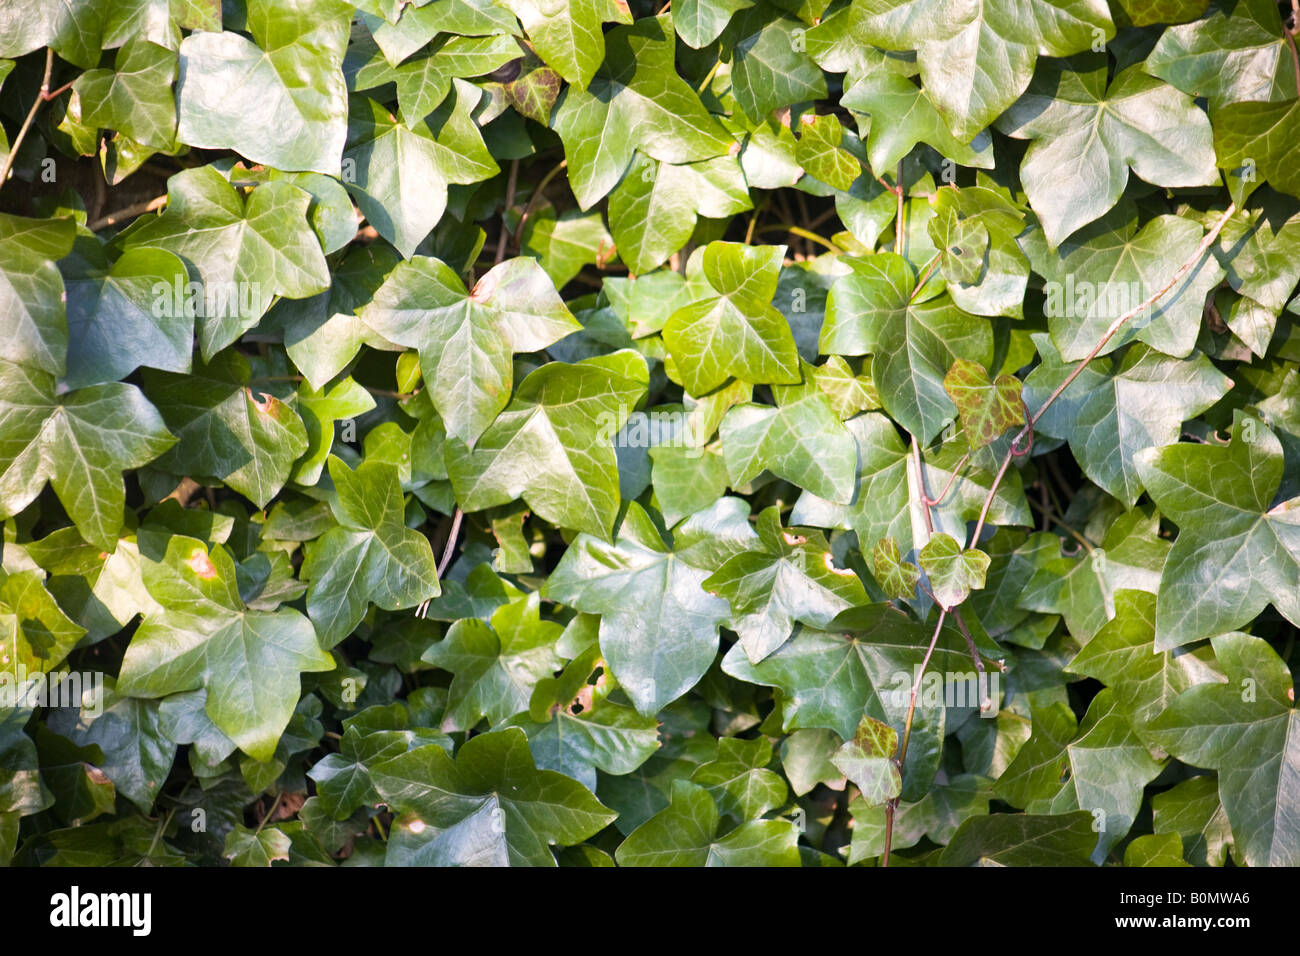 Fresh new vigorous growth with ivy leaves Stock Photo